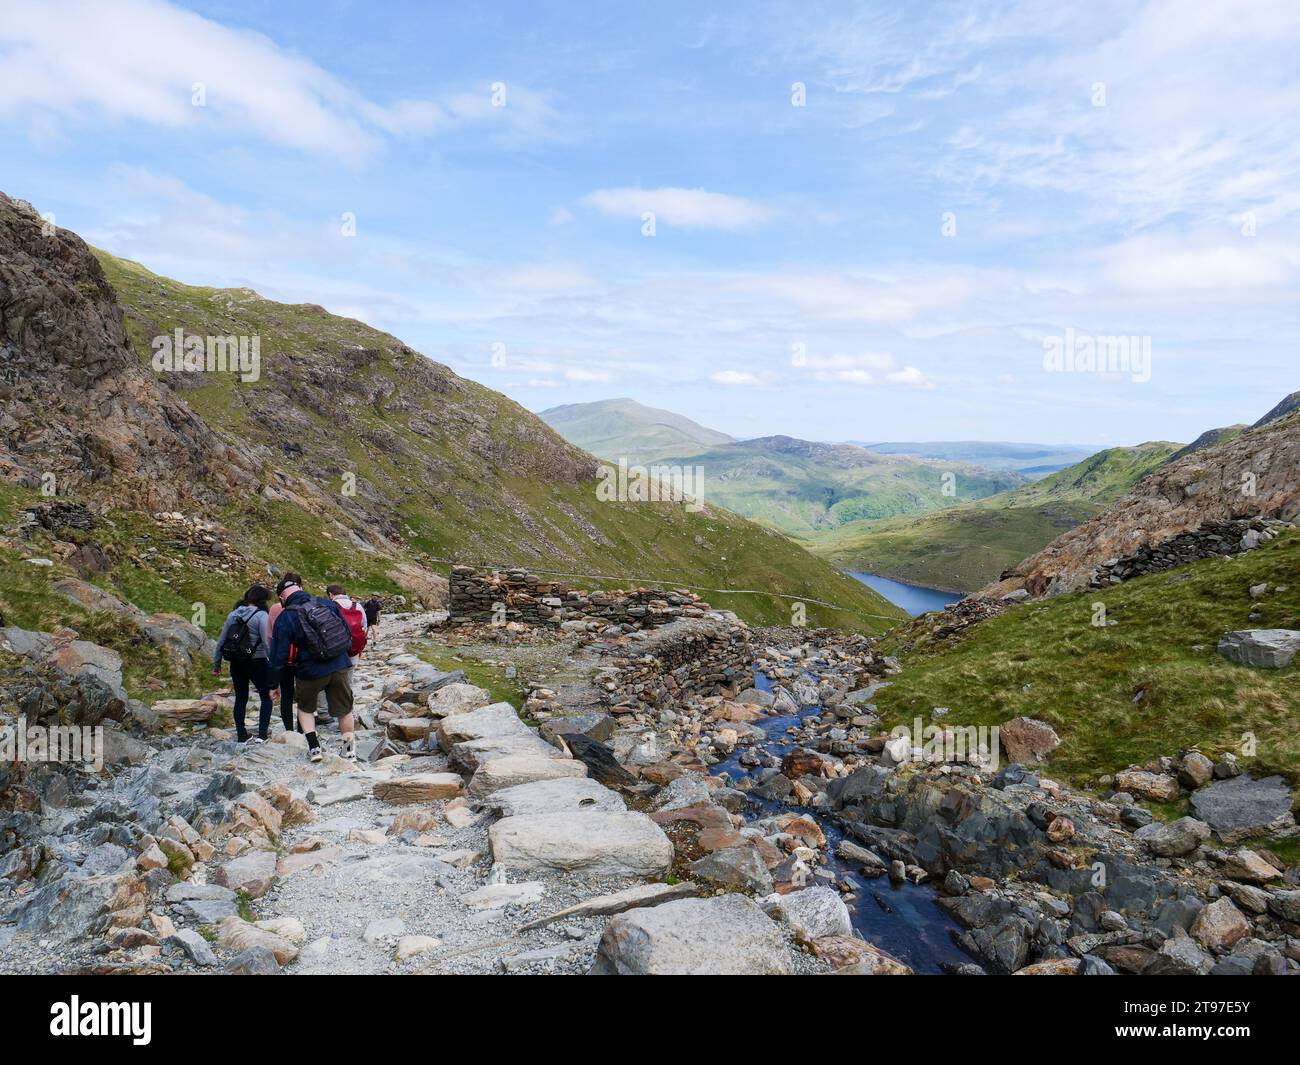 Rear view of group of hikers with backpacks walking down the Miners' Track from Mount Snowdon in stunning scenery of Snowdonia mountains in Wales, UK. Stock Photo